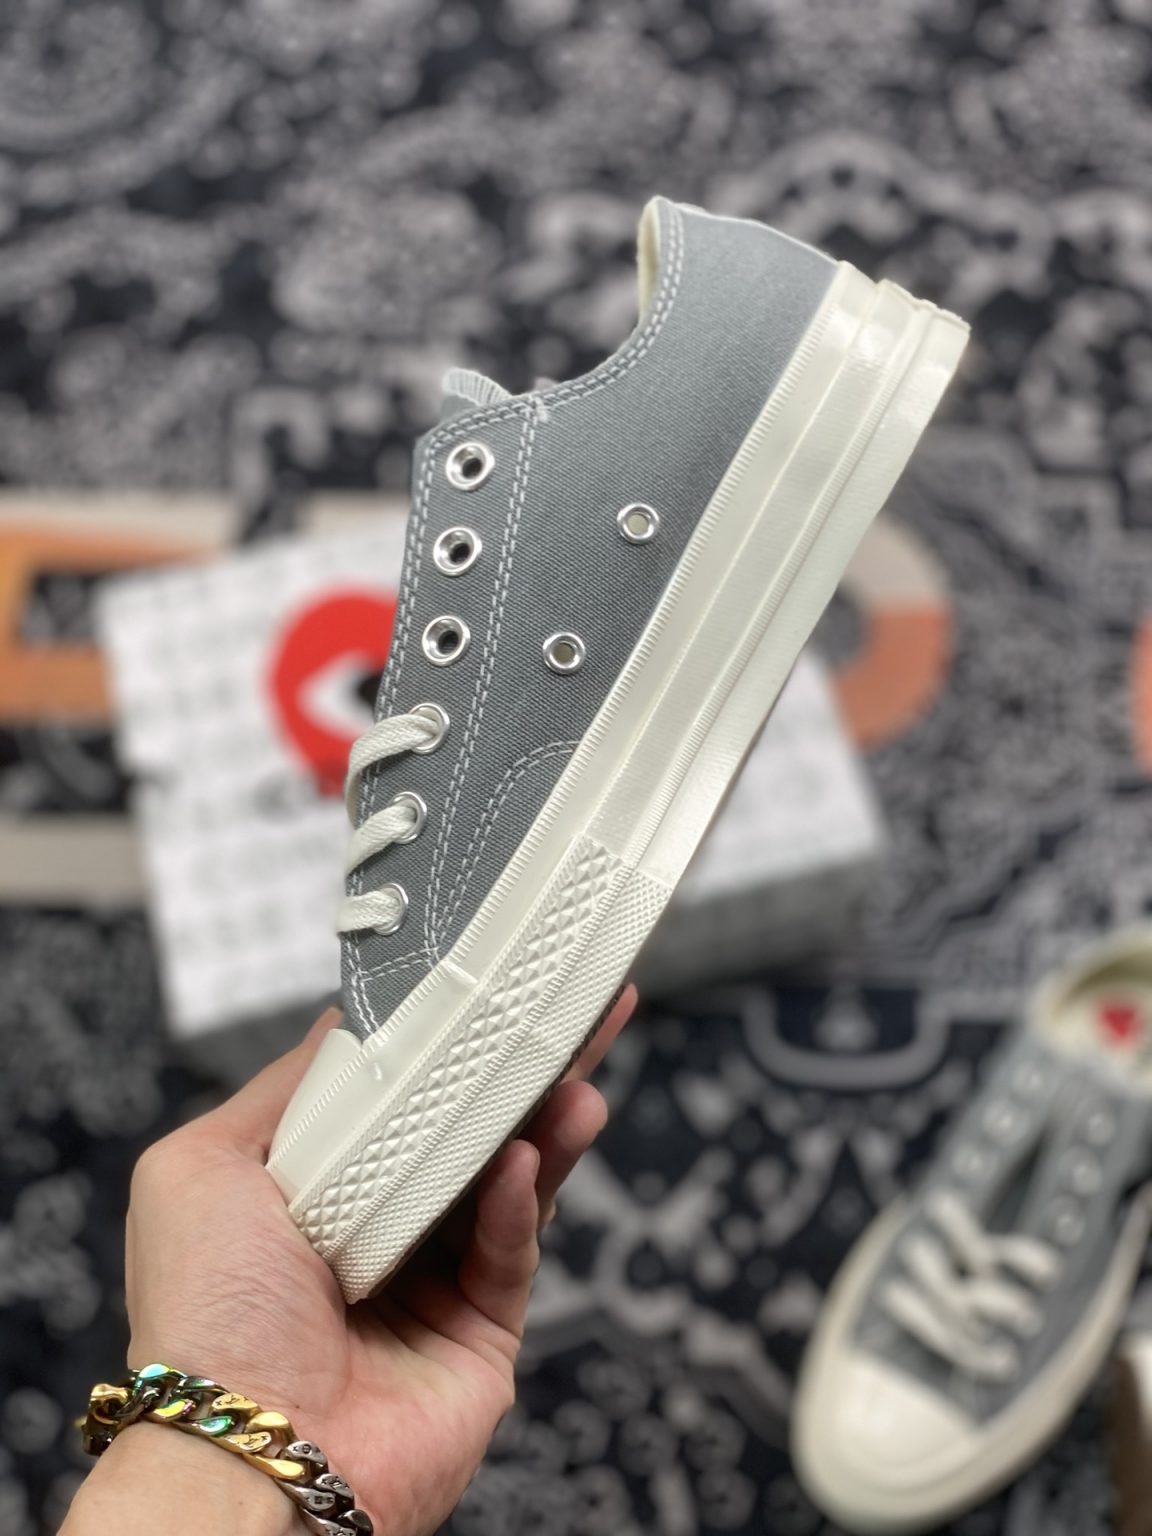 CDG Play x Converse Chuck Taylor All Star 70 Low Grey For Sale ...